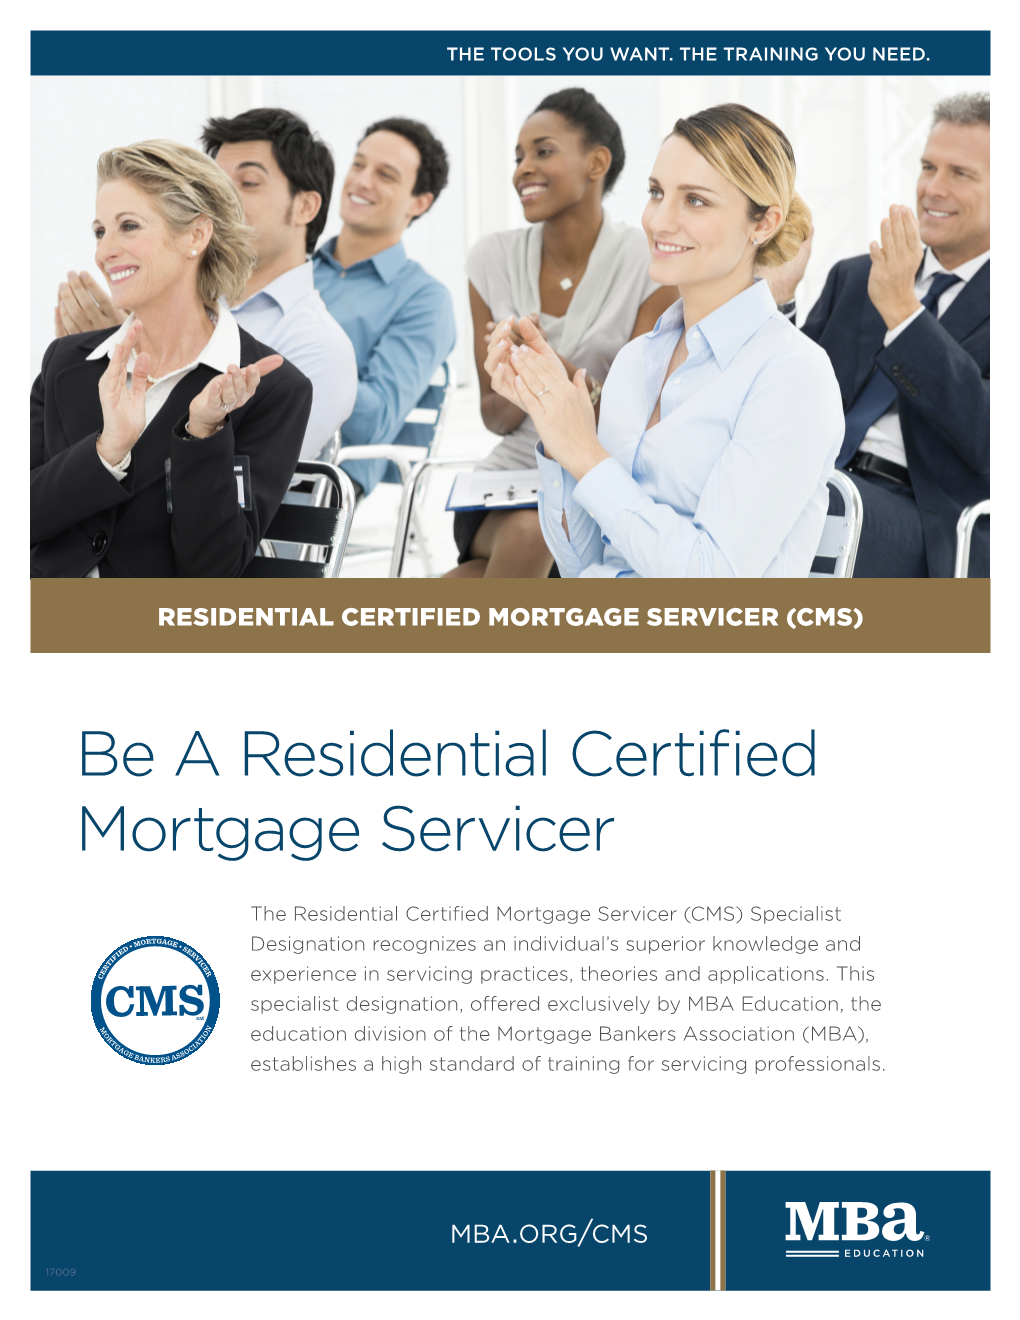 Be a Residential Certified Mortgage Servicer